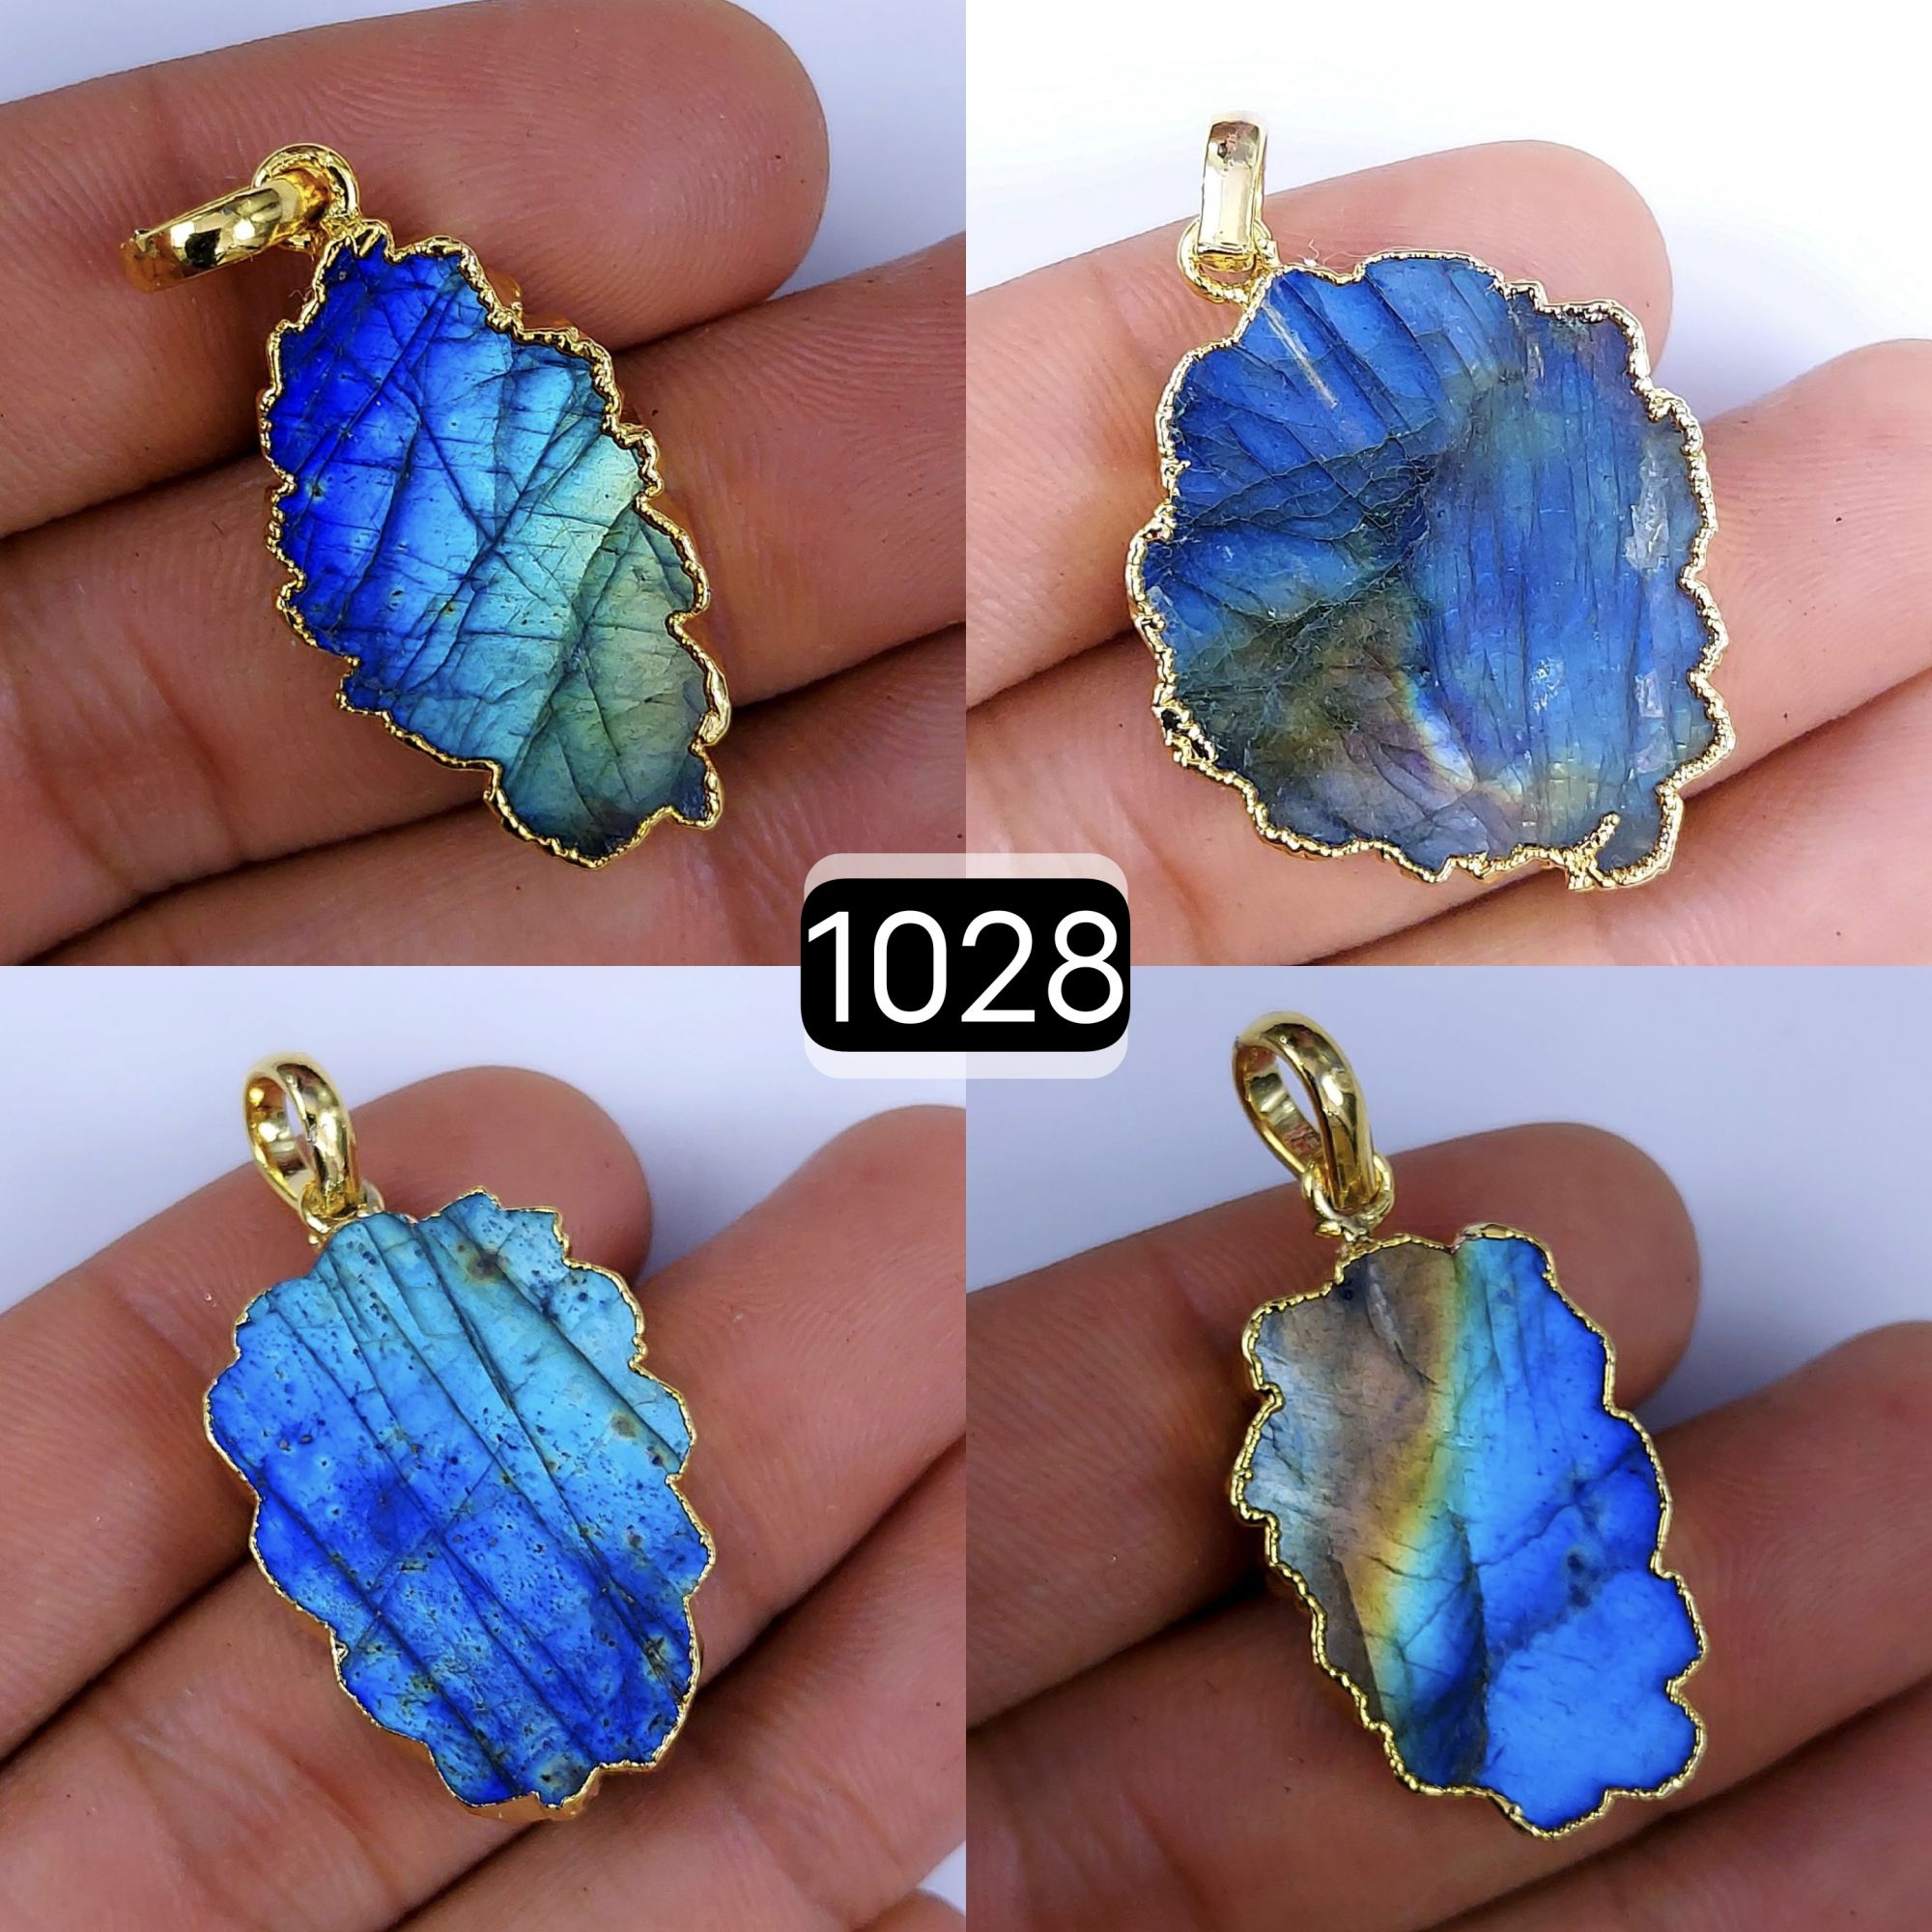 138Cts Natural Blue Labradorite Gold Electroplated Slice Pendant 32x18 22x12mm#1028